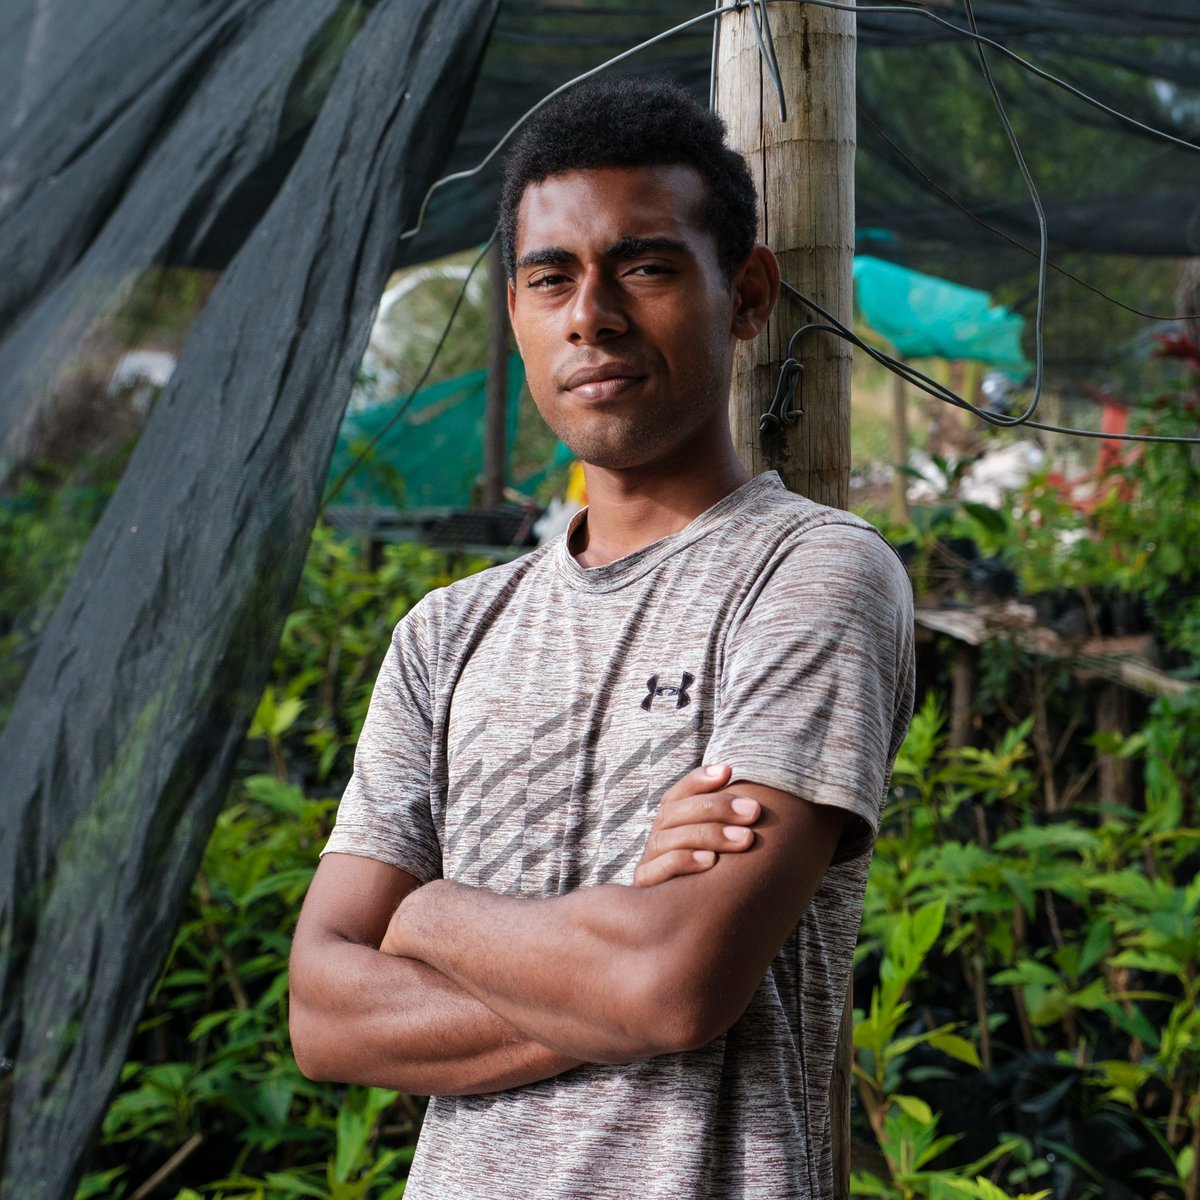 20-year-old Feretariki is the youngest member of his farming cluster in #Fiji 🇫🇯

Because of his dedication, he was asked to look after 2,000 breadfruit seedlings distributed by IFAD.

Now, he’s helping to expand the use of this local, sustainable crop in the region 🚜🙌